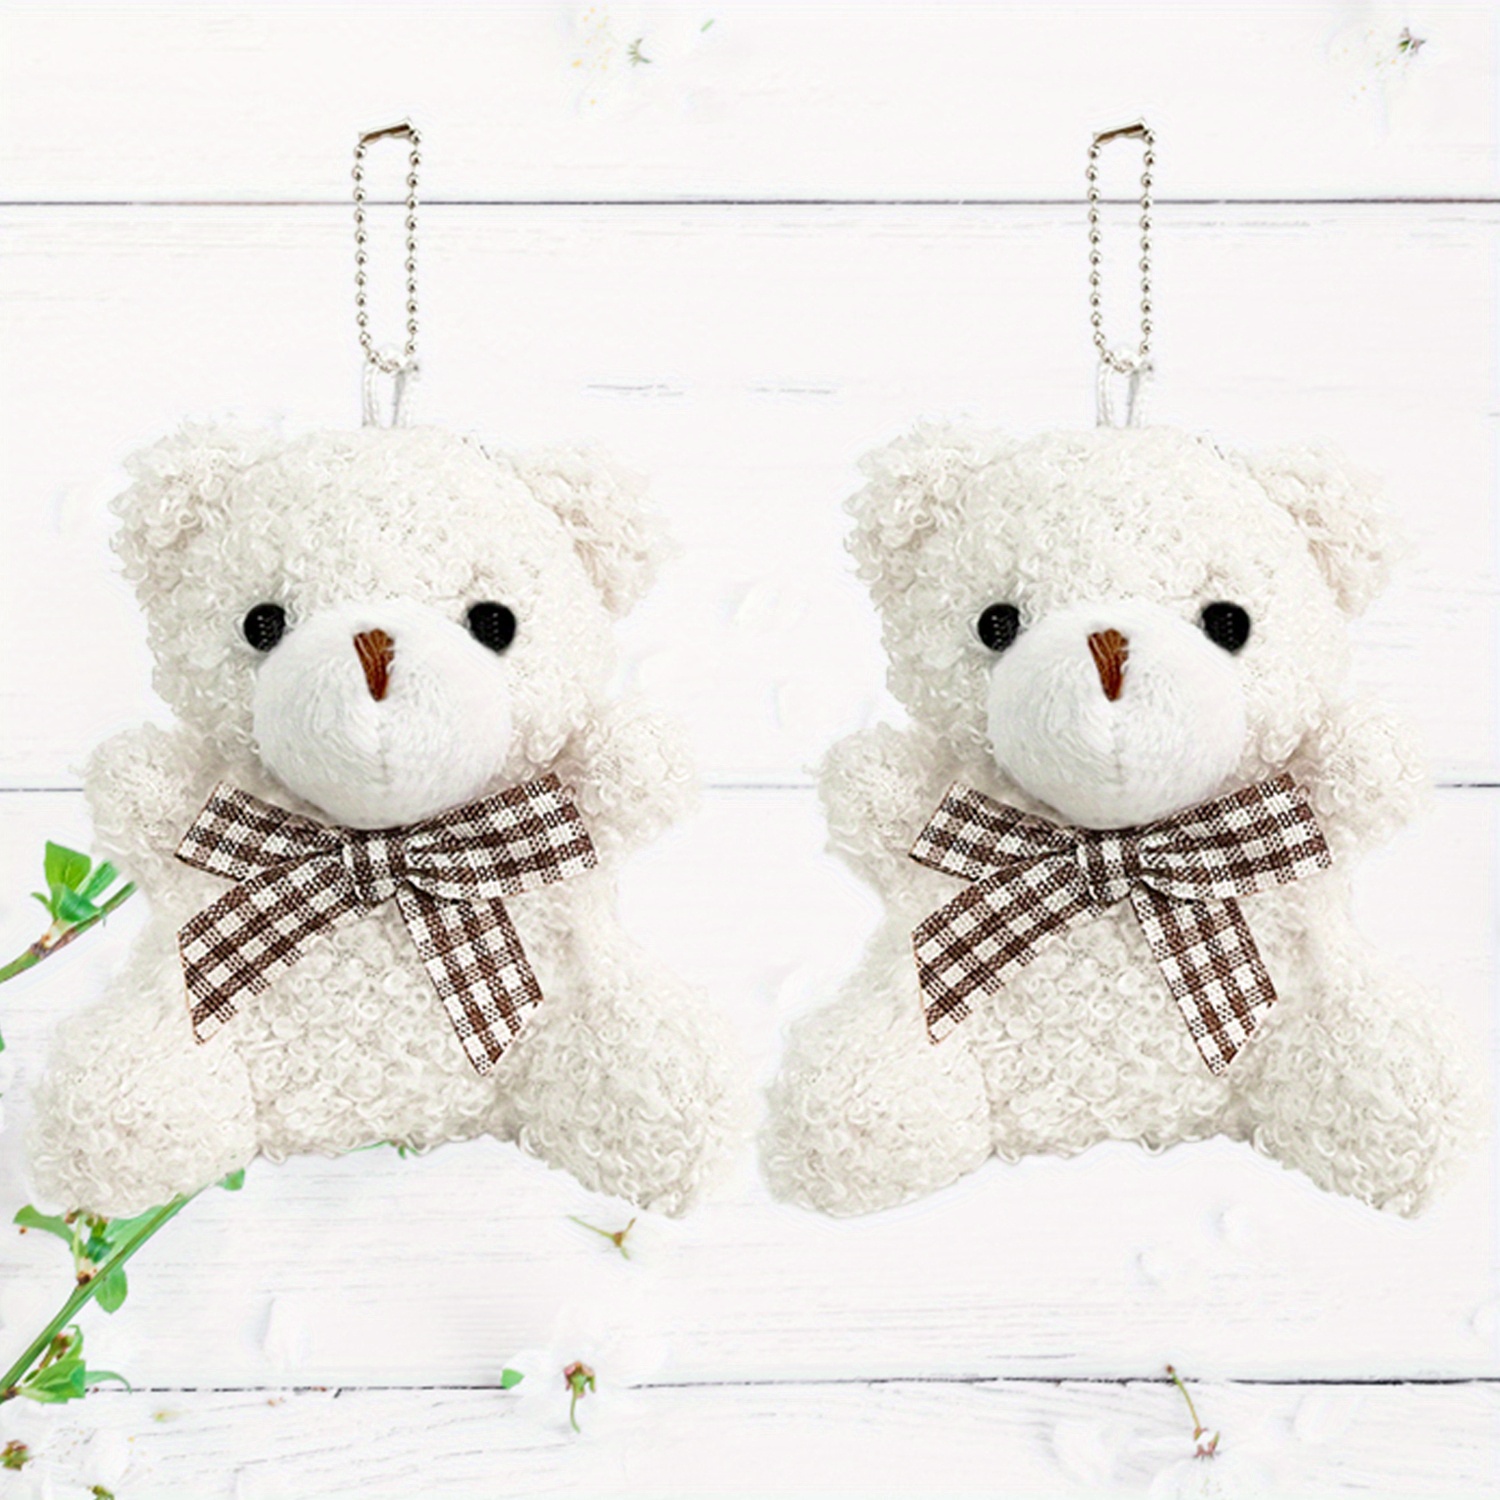 KESYOO 3 Pcs Mini Joint Teddy Bear Keychains Stuffed Animal Plush Toys  Animals Keychain Doll Bag Charm for Wedding Party Favors Decoration White  Brown